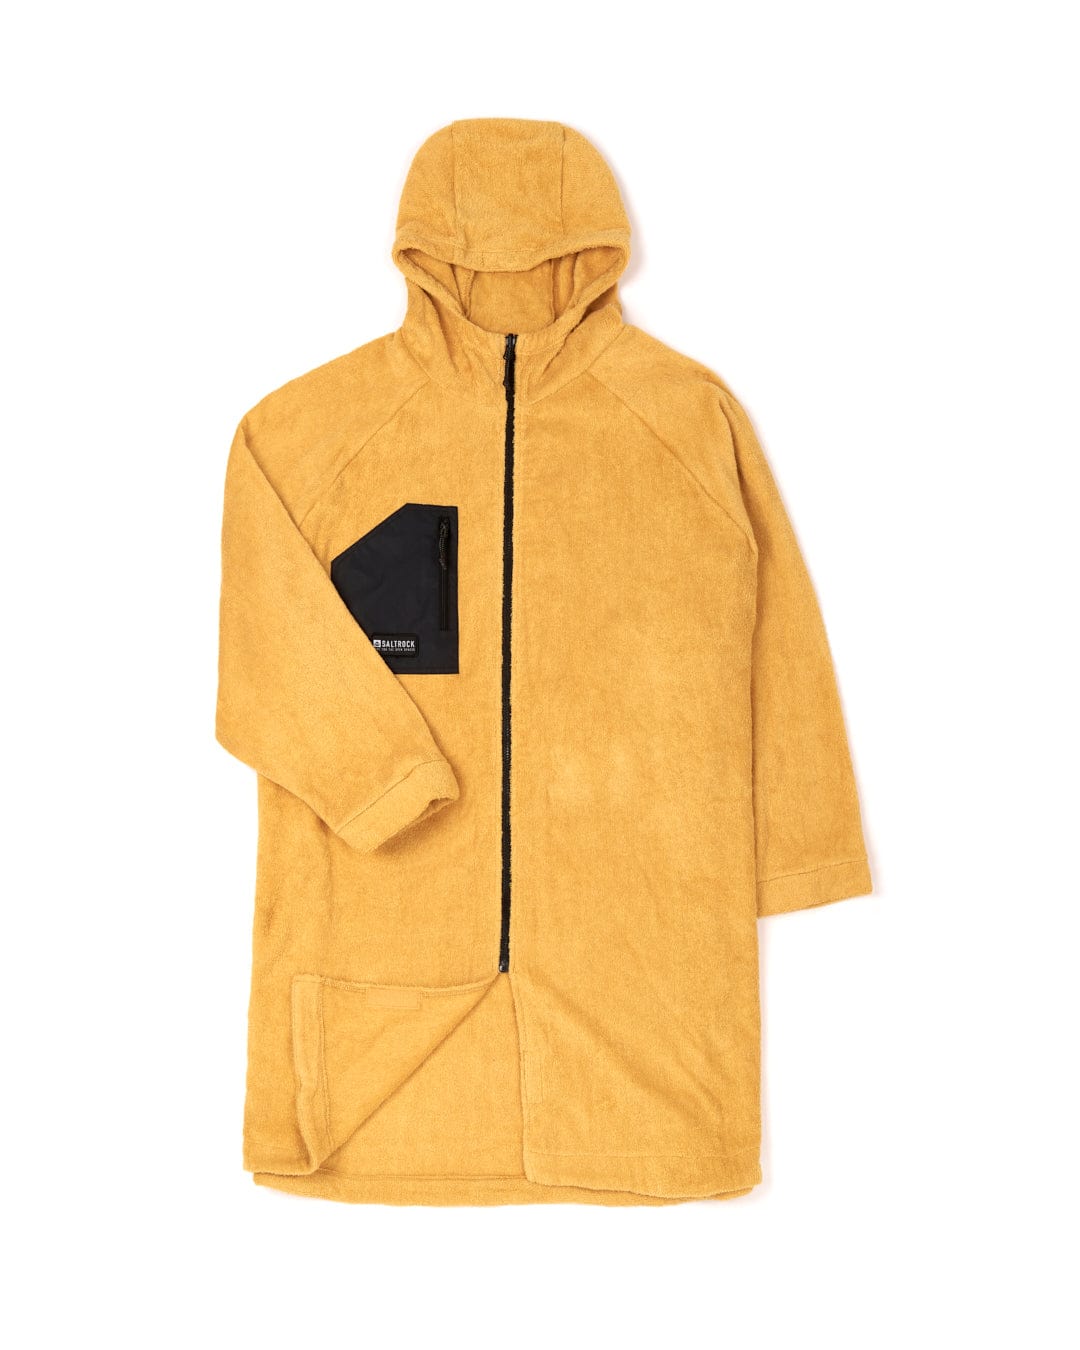 Yellow fleece jacket with a hood, full-length zipper, and front pocket, crafted from recycled material, displayed flat on a white background - Saltrock's 3 in 1 Recycled Four Seasons Changing Robe - Black/Yellow.